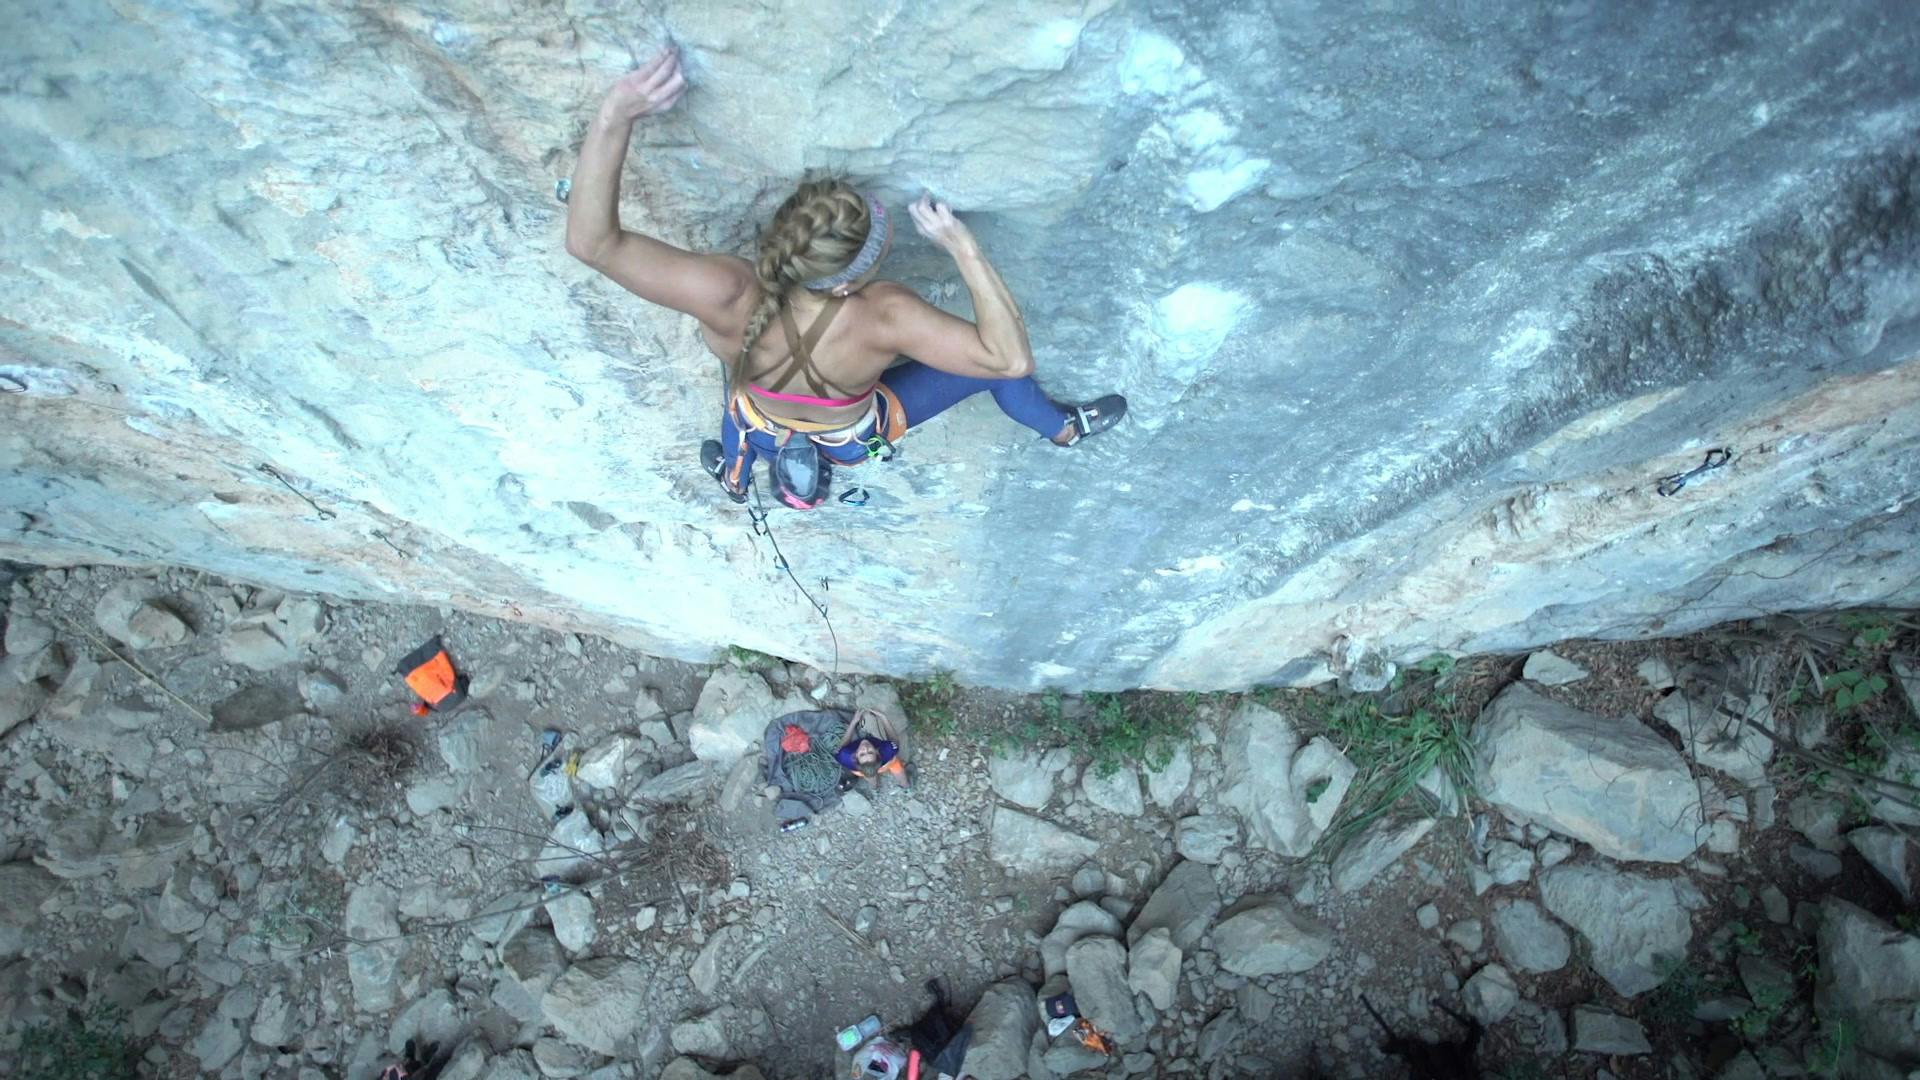 Ep 5 | First Female Ascent of a Big Wall in El Salto, Mexico